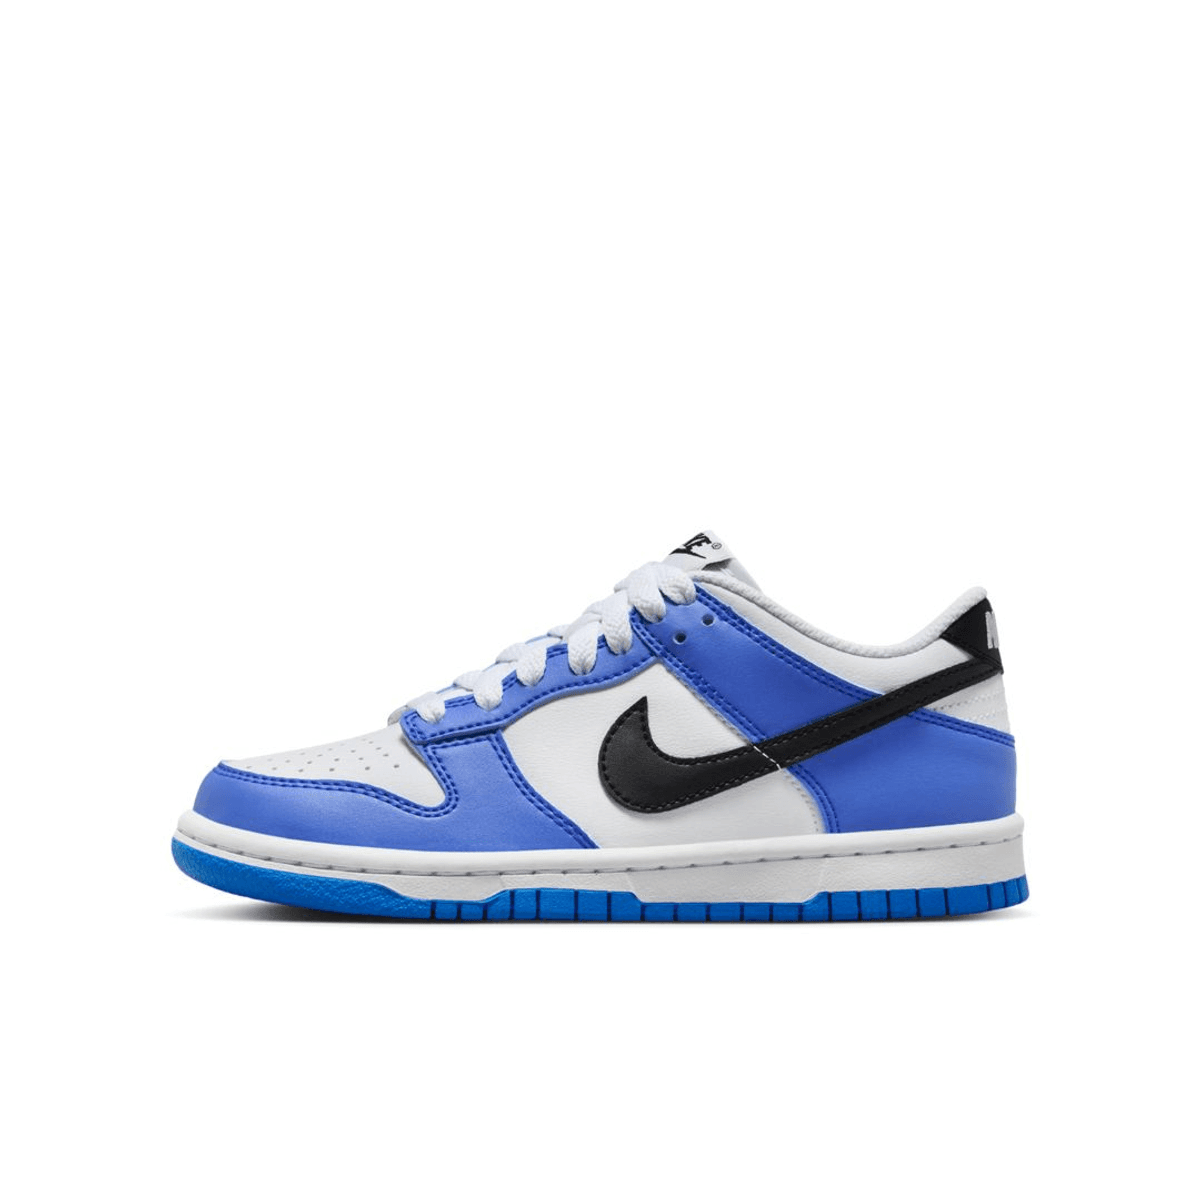 Arrive Back To School In Style With The Nike Dunk Low "Photo Blue"